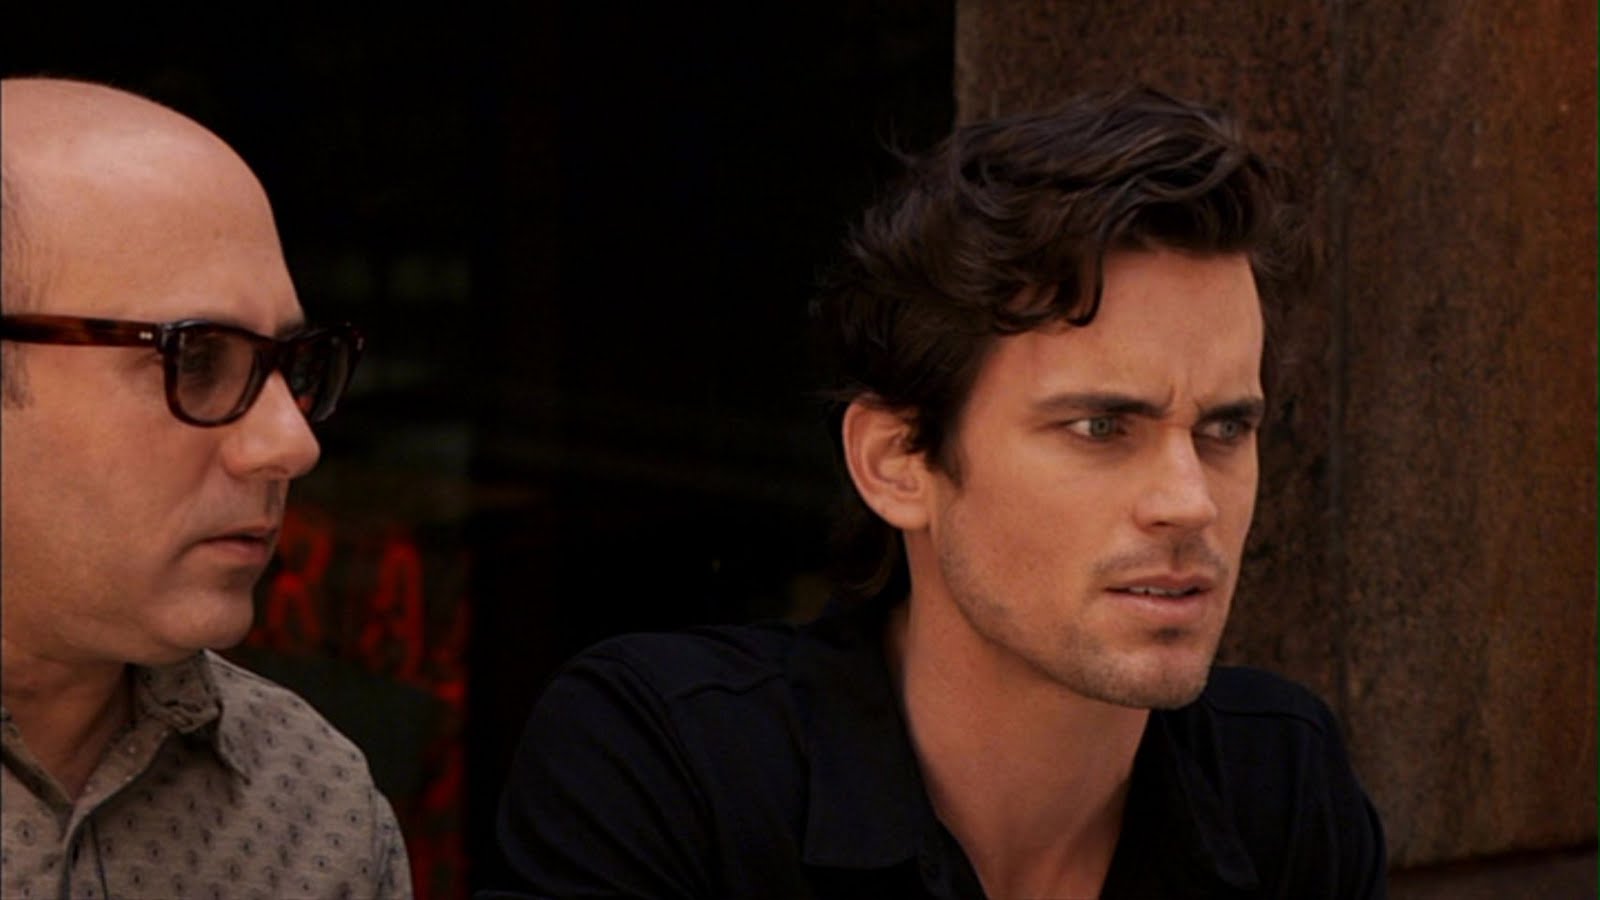 White Collar' Season 5 Premiere Recap: A Demon And His Deals (2013/10/18)-  Tickets to Movies in Theaters, Broadway Shows, London Theatre & More